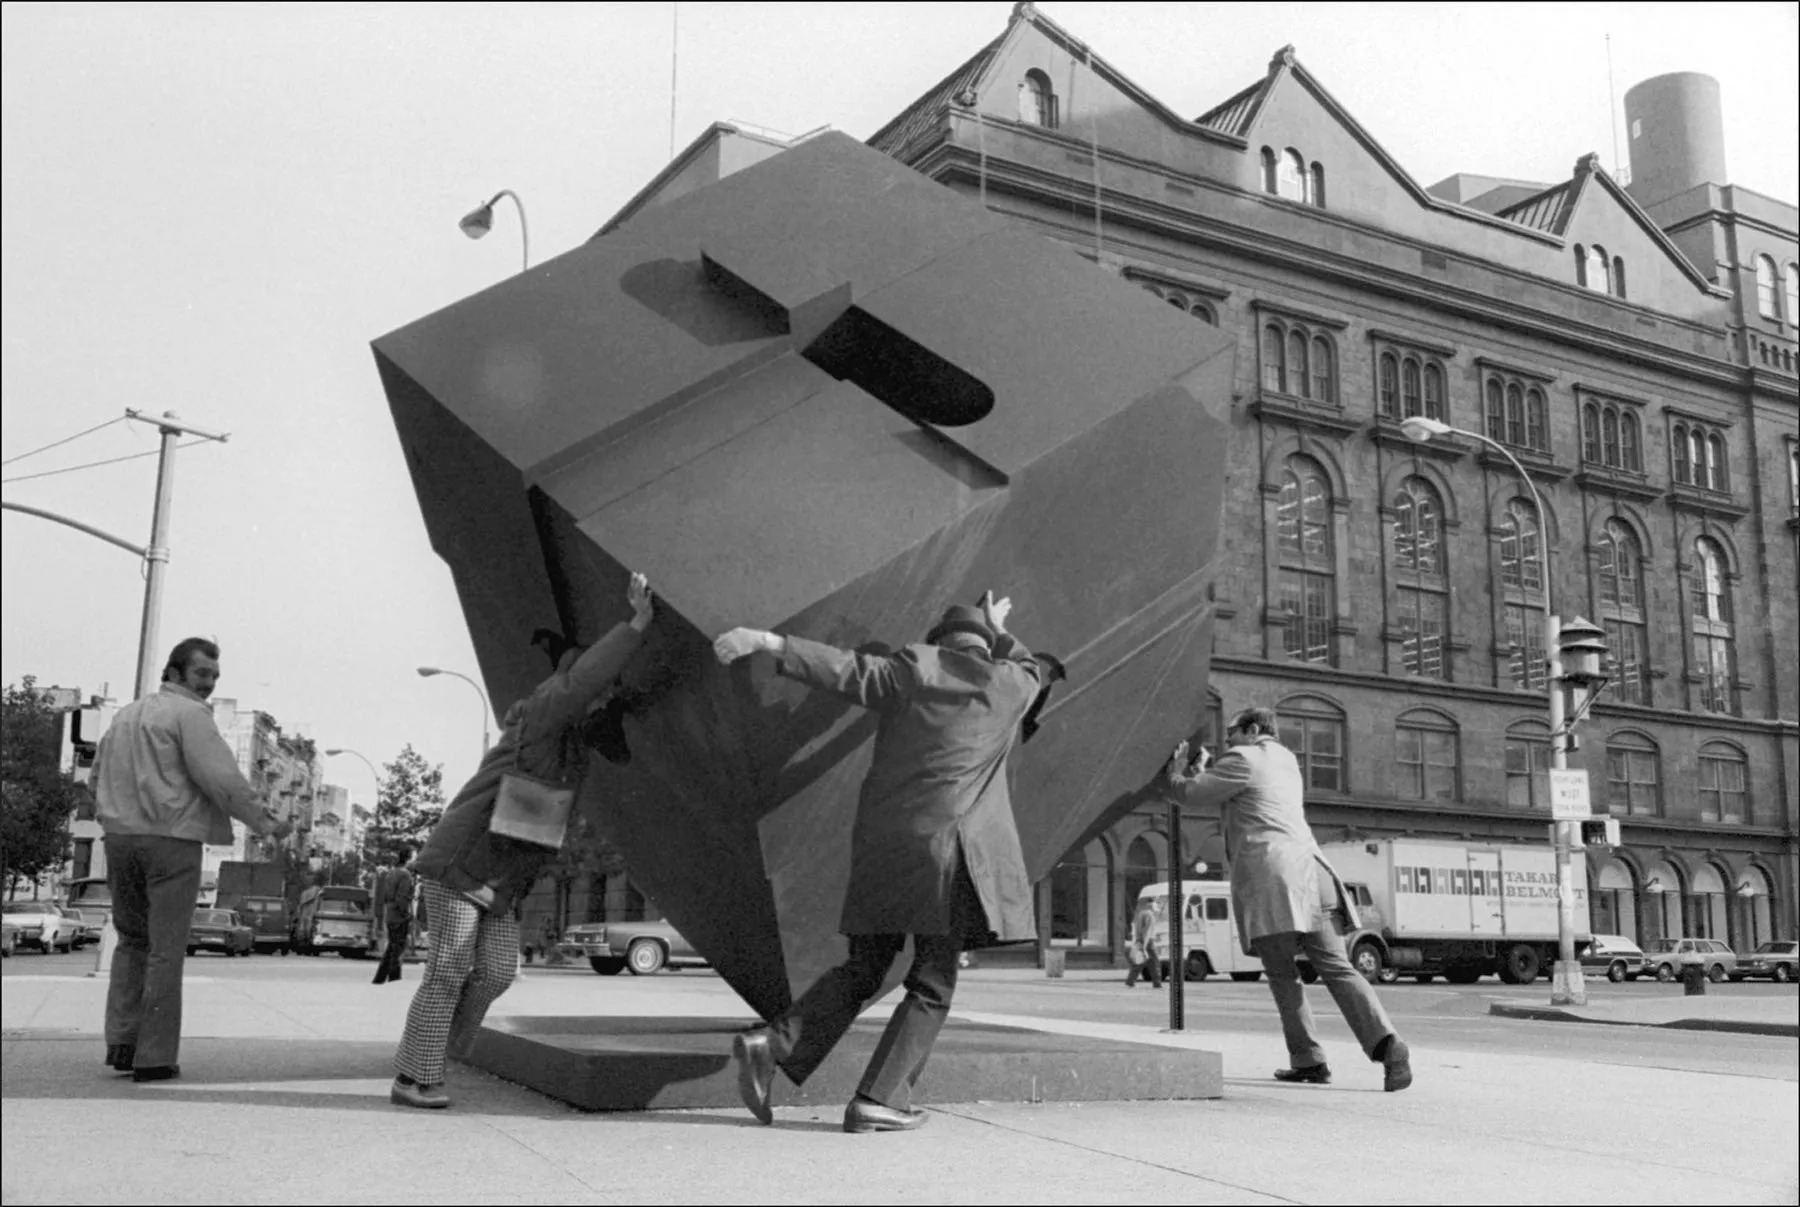 Passers-by rotate Tony Rosenthal’s Alamo (1967) in Cooper Square, New York City, October 10, 1974.